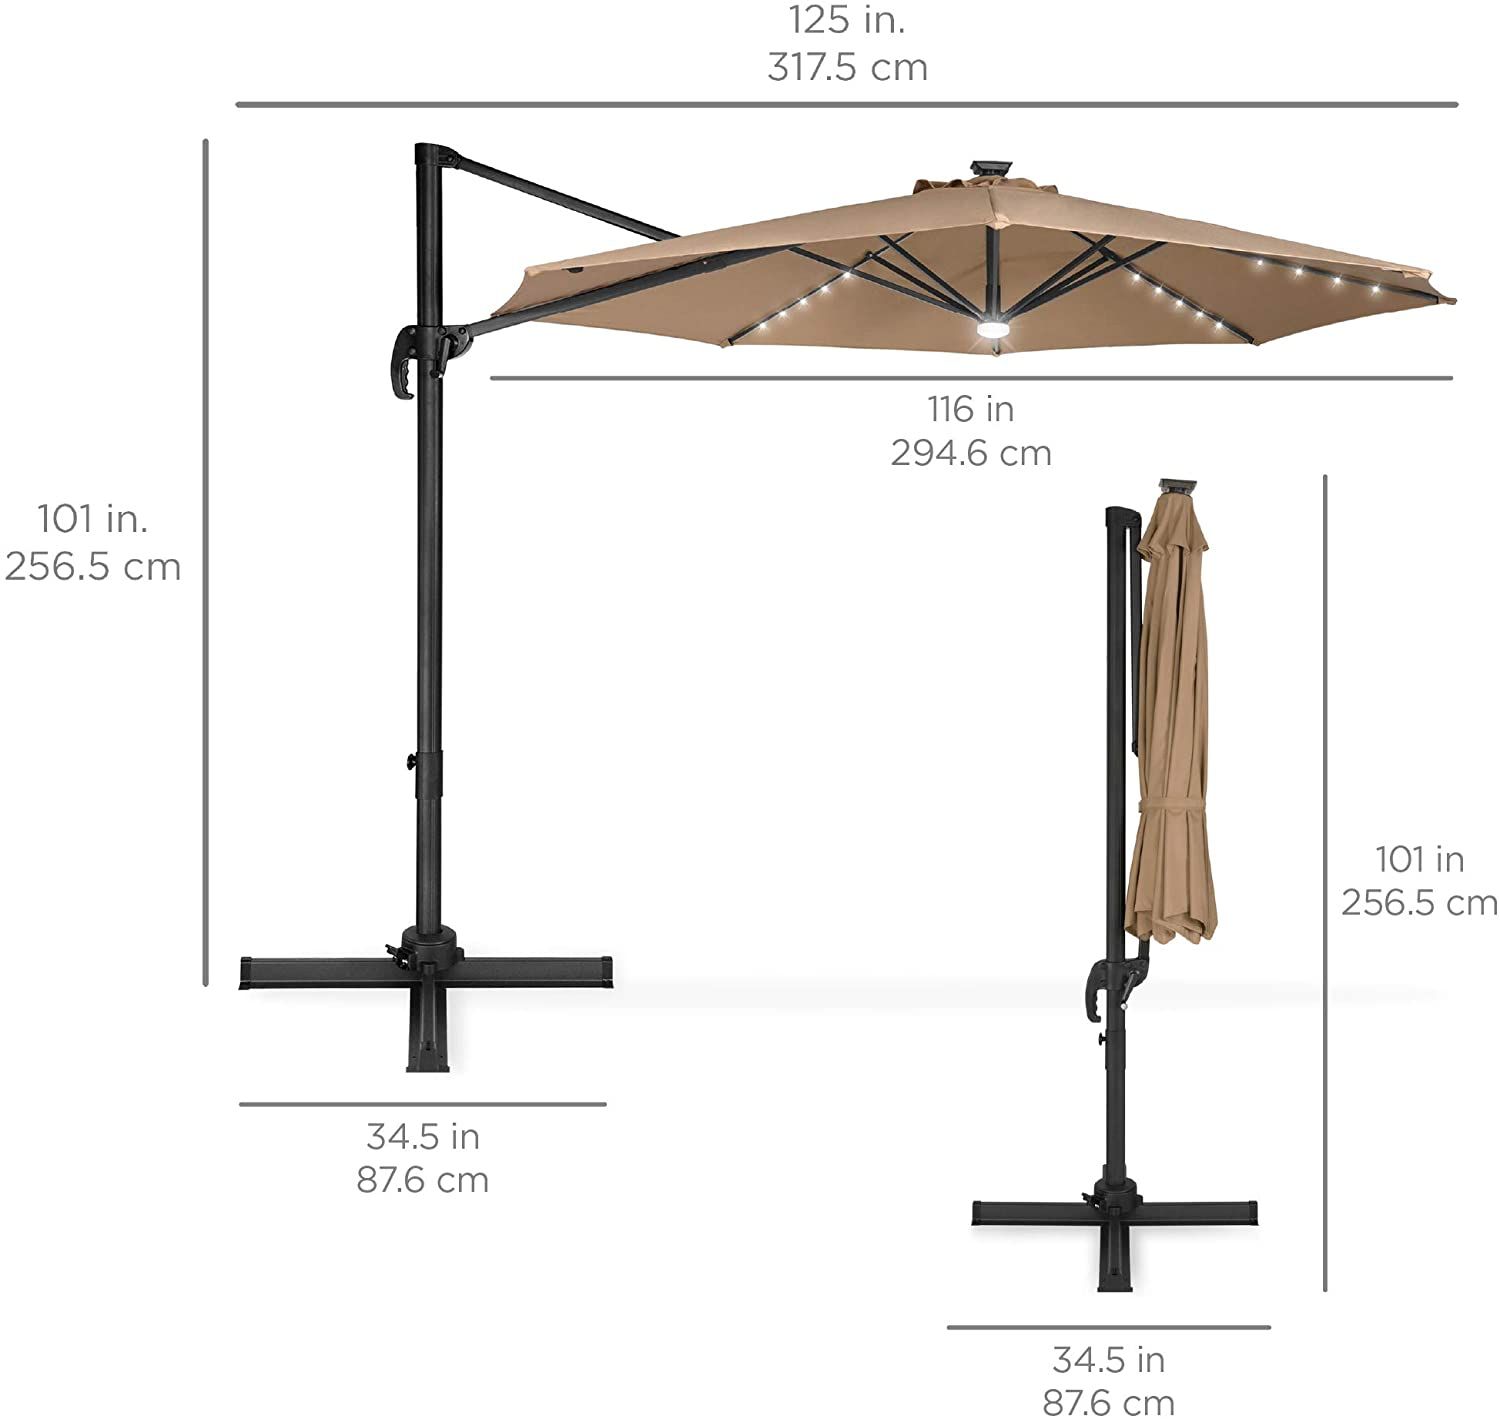 Cantilever Umbrella – What’s Up With
Them?